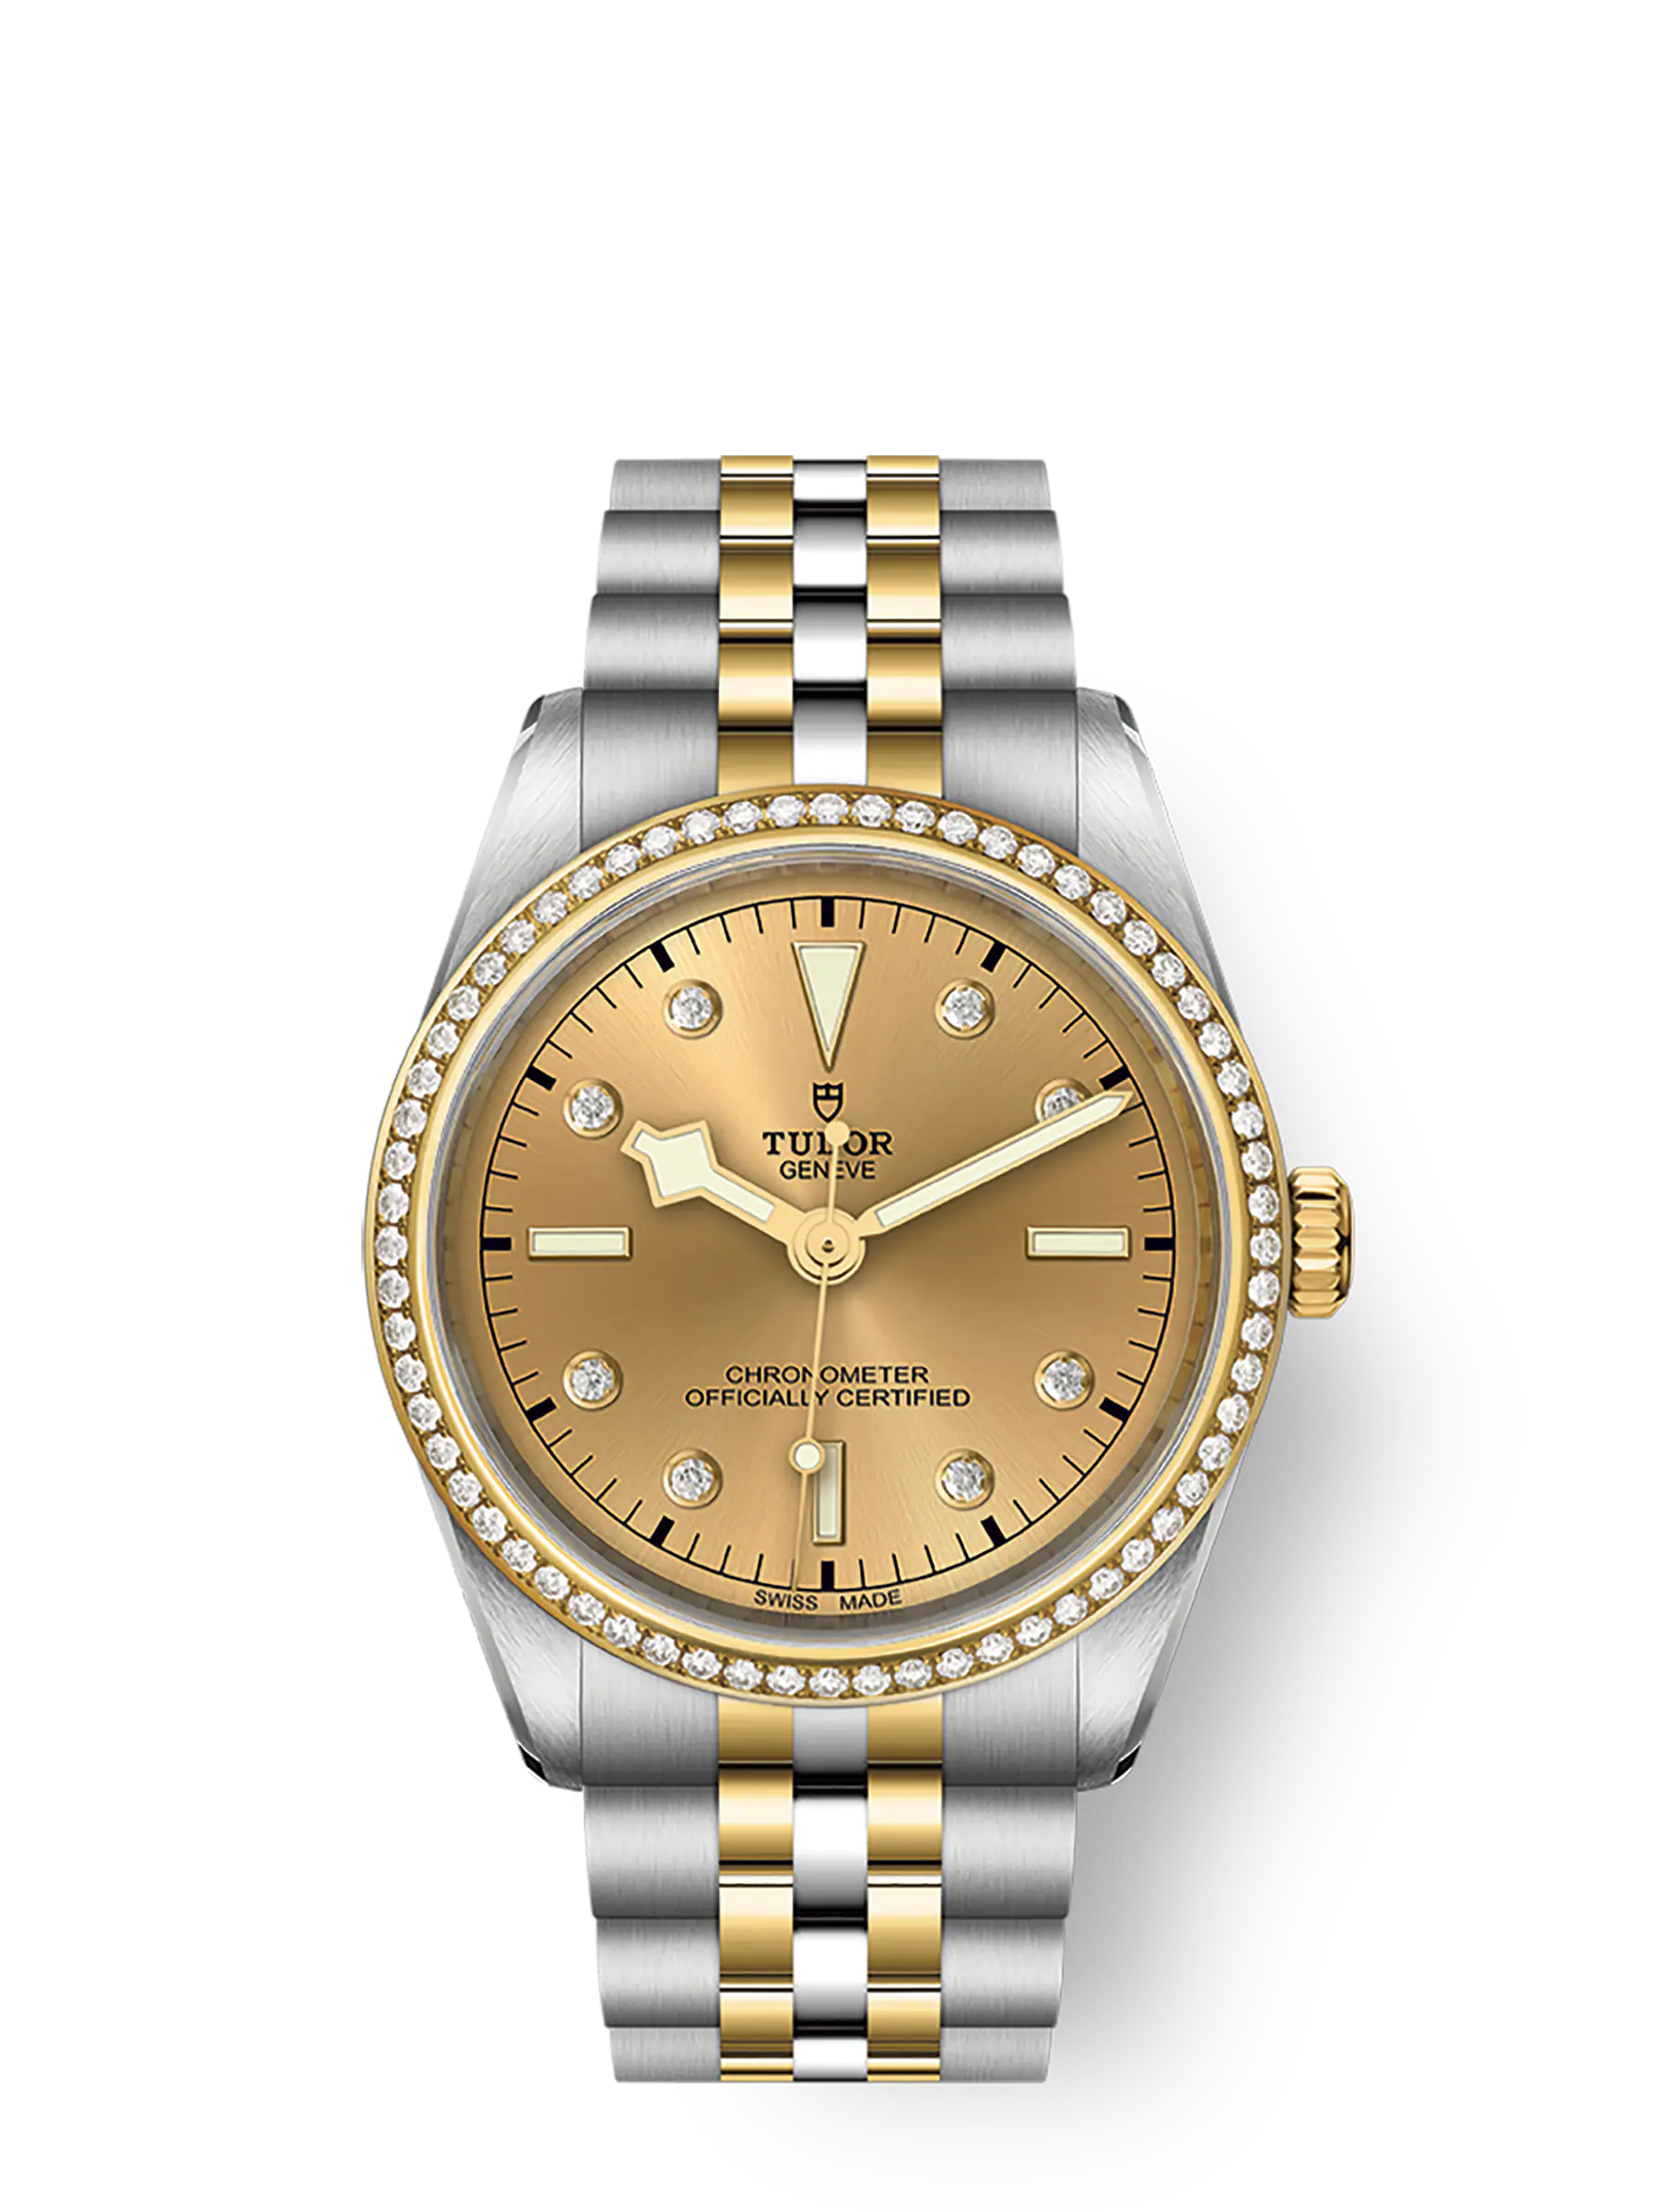 Tudor Black Bay 36 S&G, 316L Stainless Steel, 18k Yellow Gold and Diamonds, Ref# M79653-0007